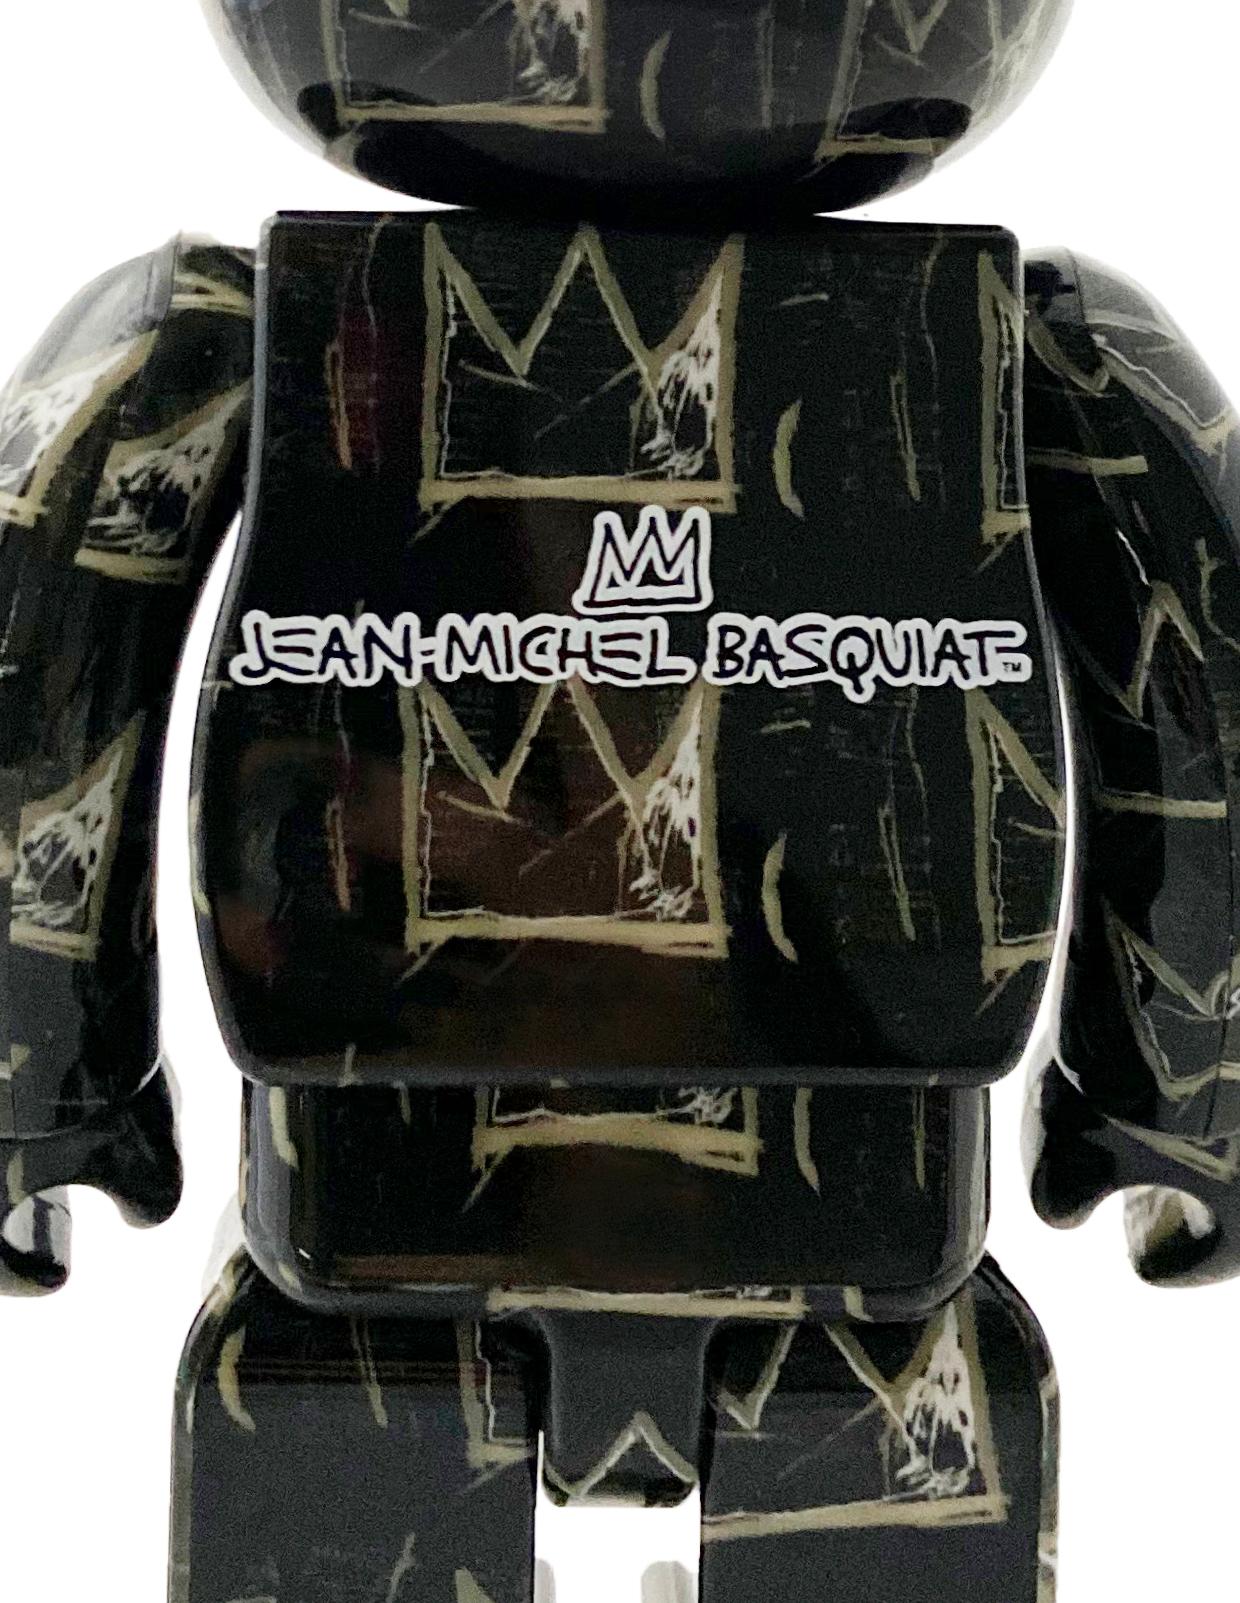 Basquiat Keith Haring Bearbrick 400% set of 2 works (Basquiat Haring BE@RBRICK) For Sale 4